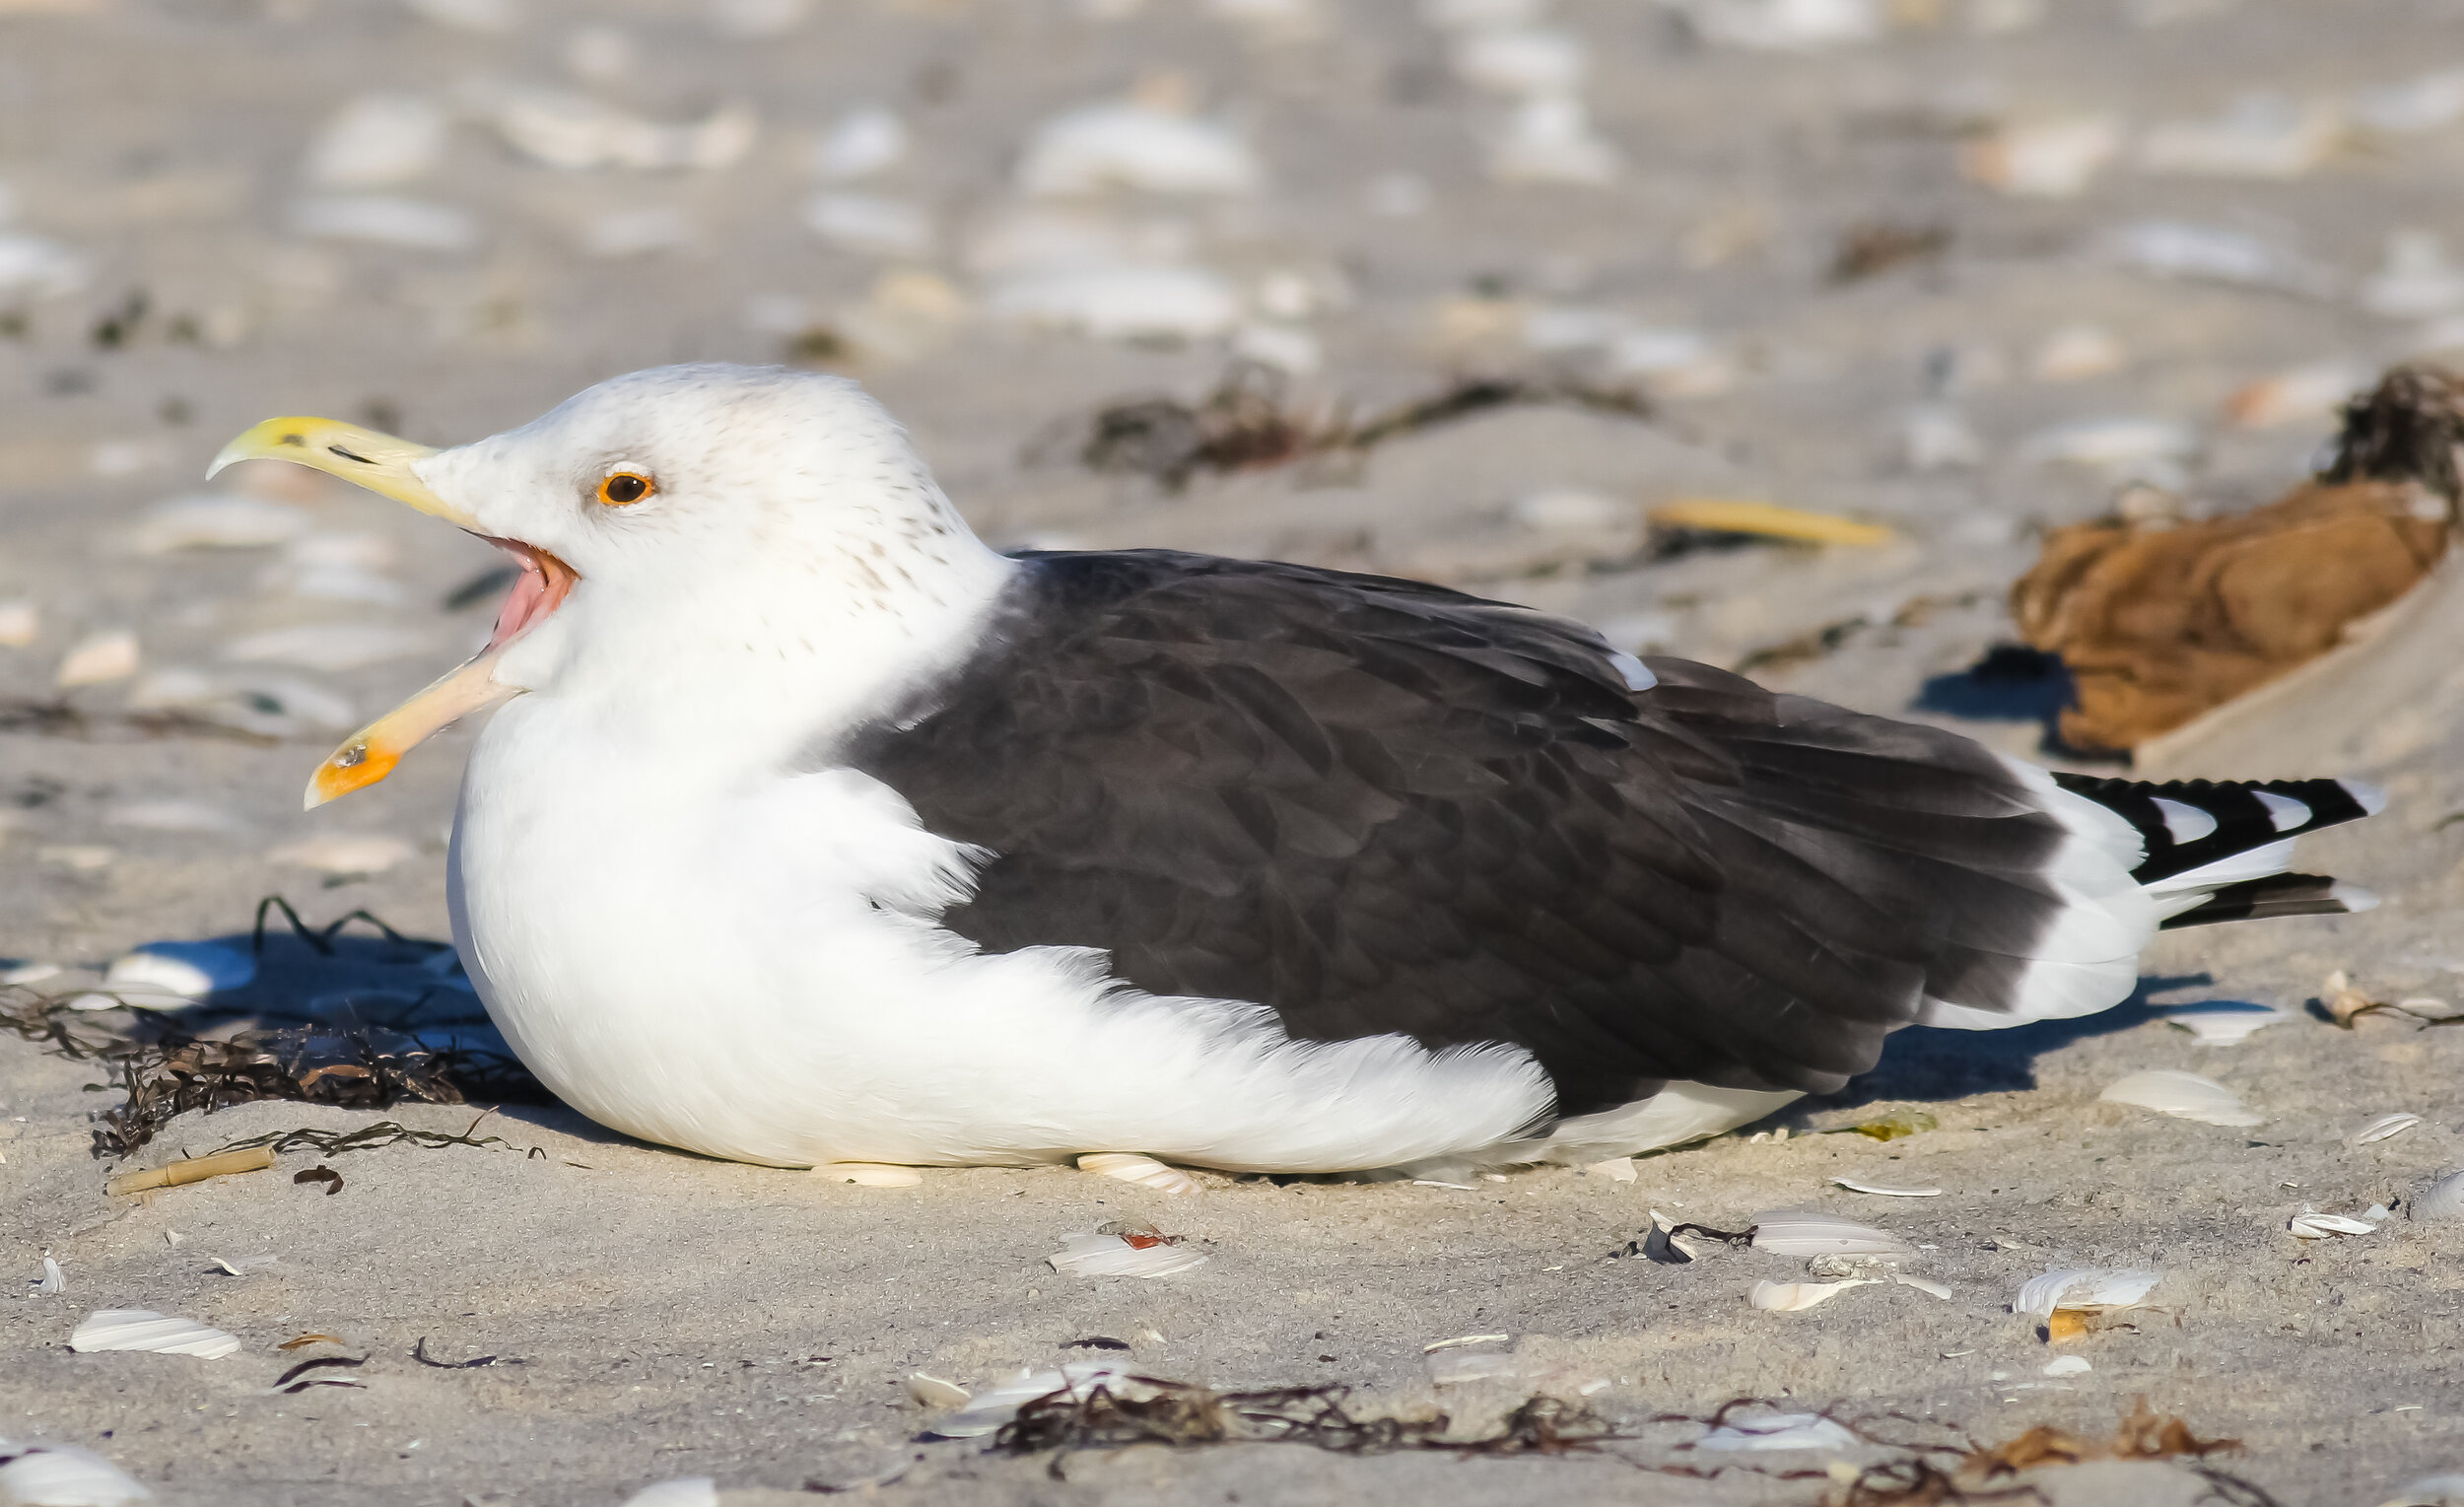 Have We All Missed The Point About Seagulls Save Coastal Wildlife